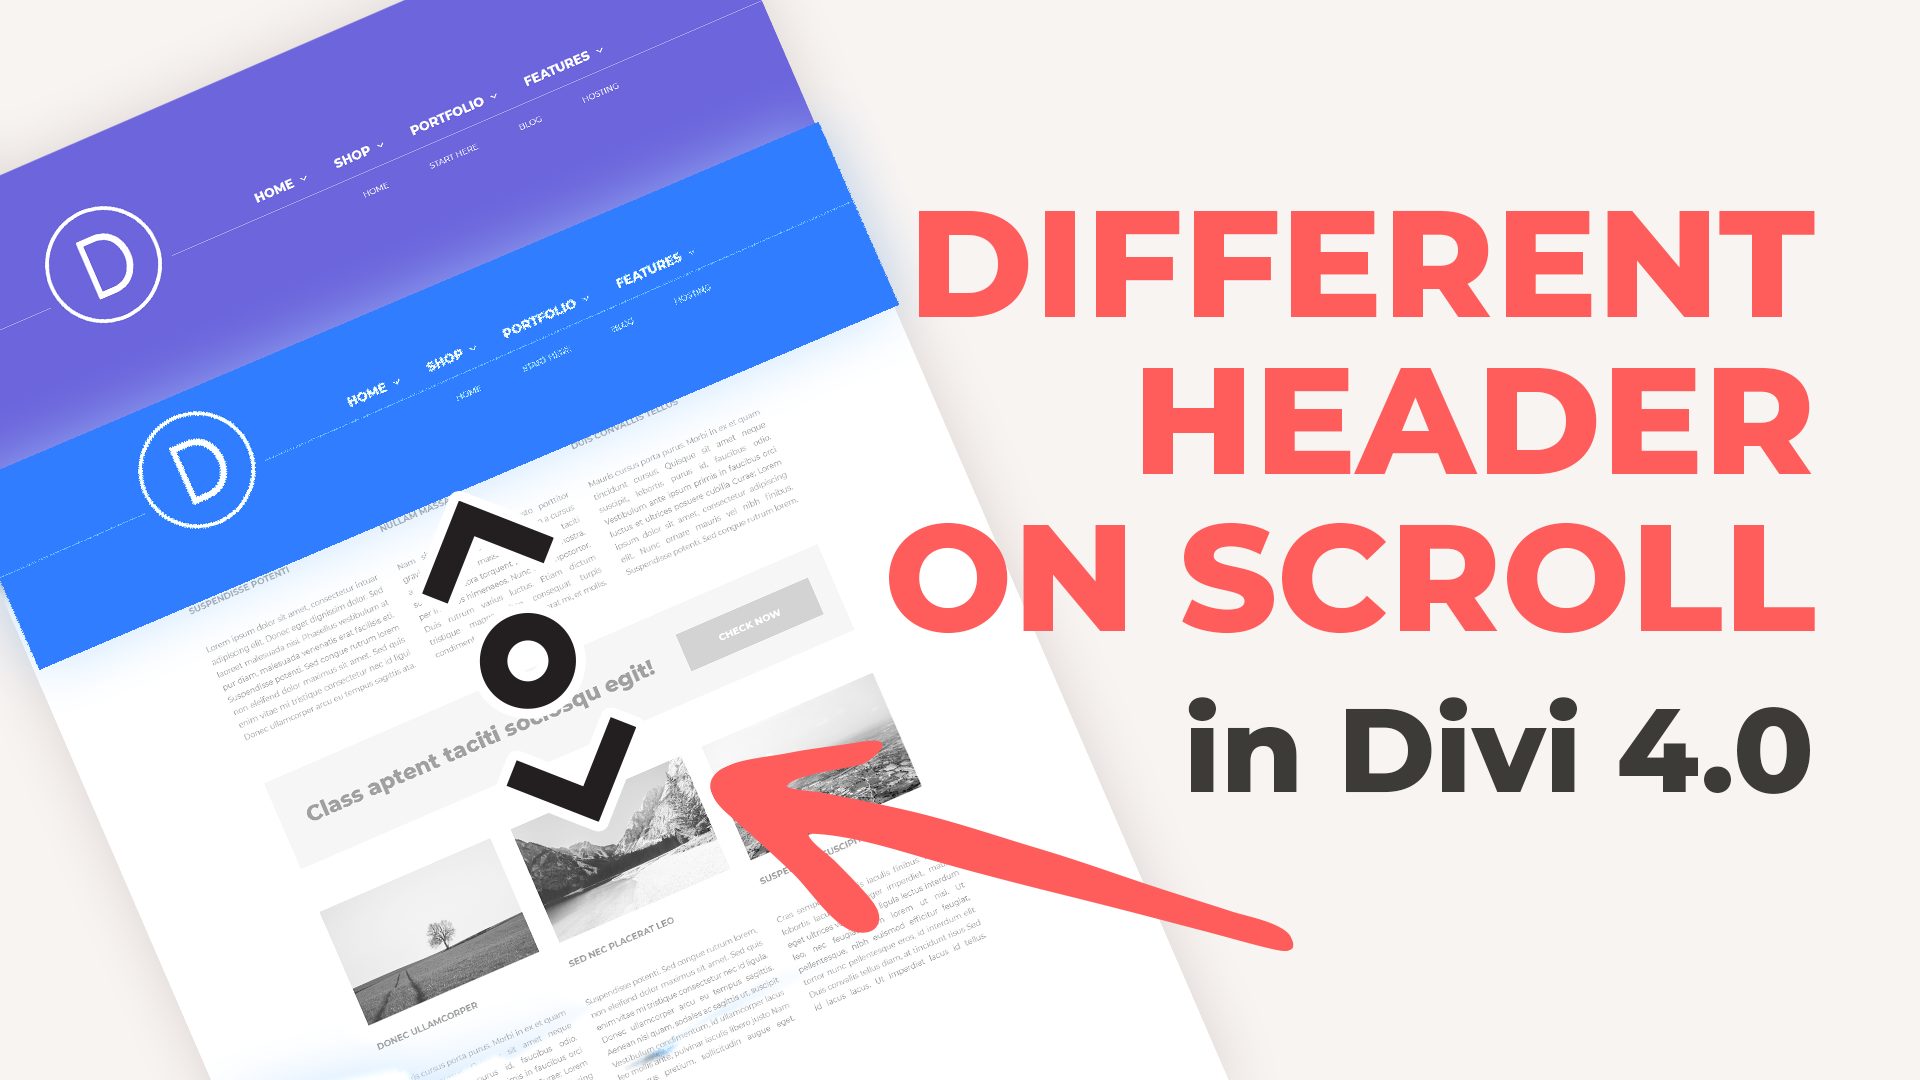 Different Header on Scroll in Divi 4.0